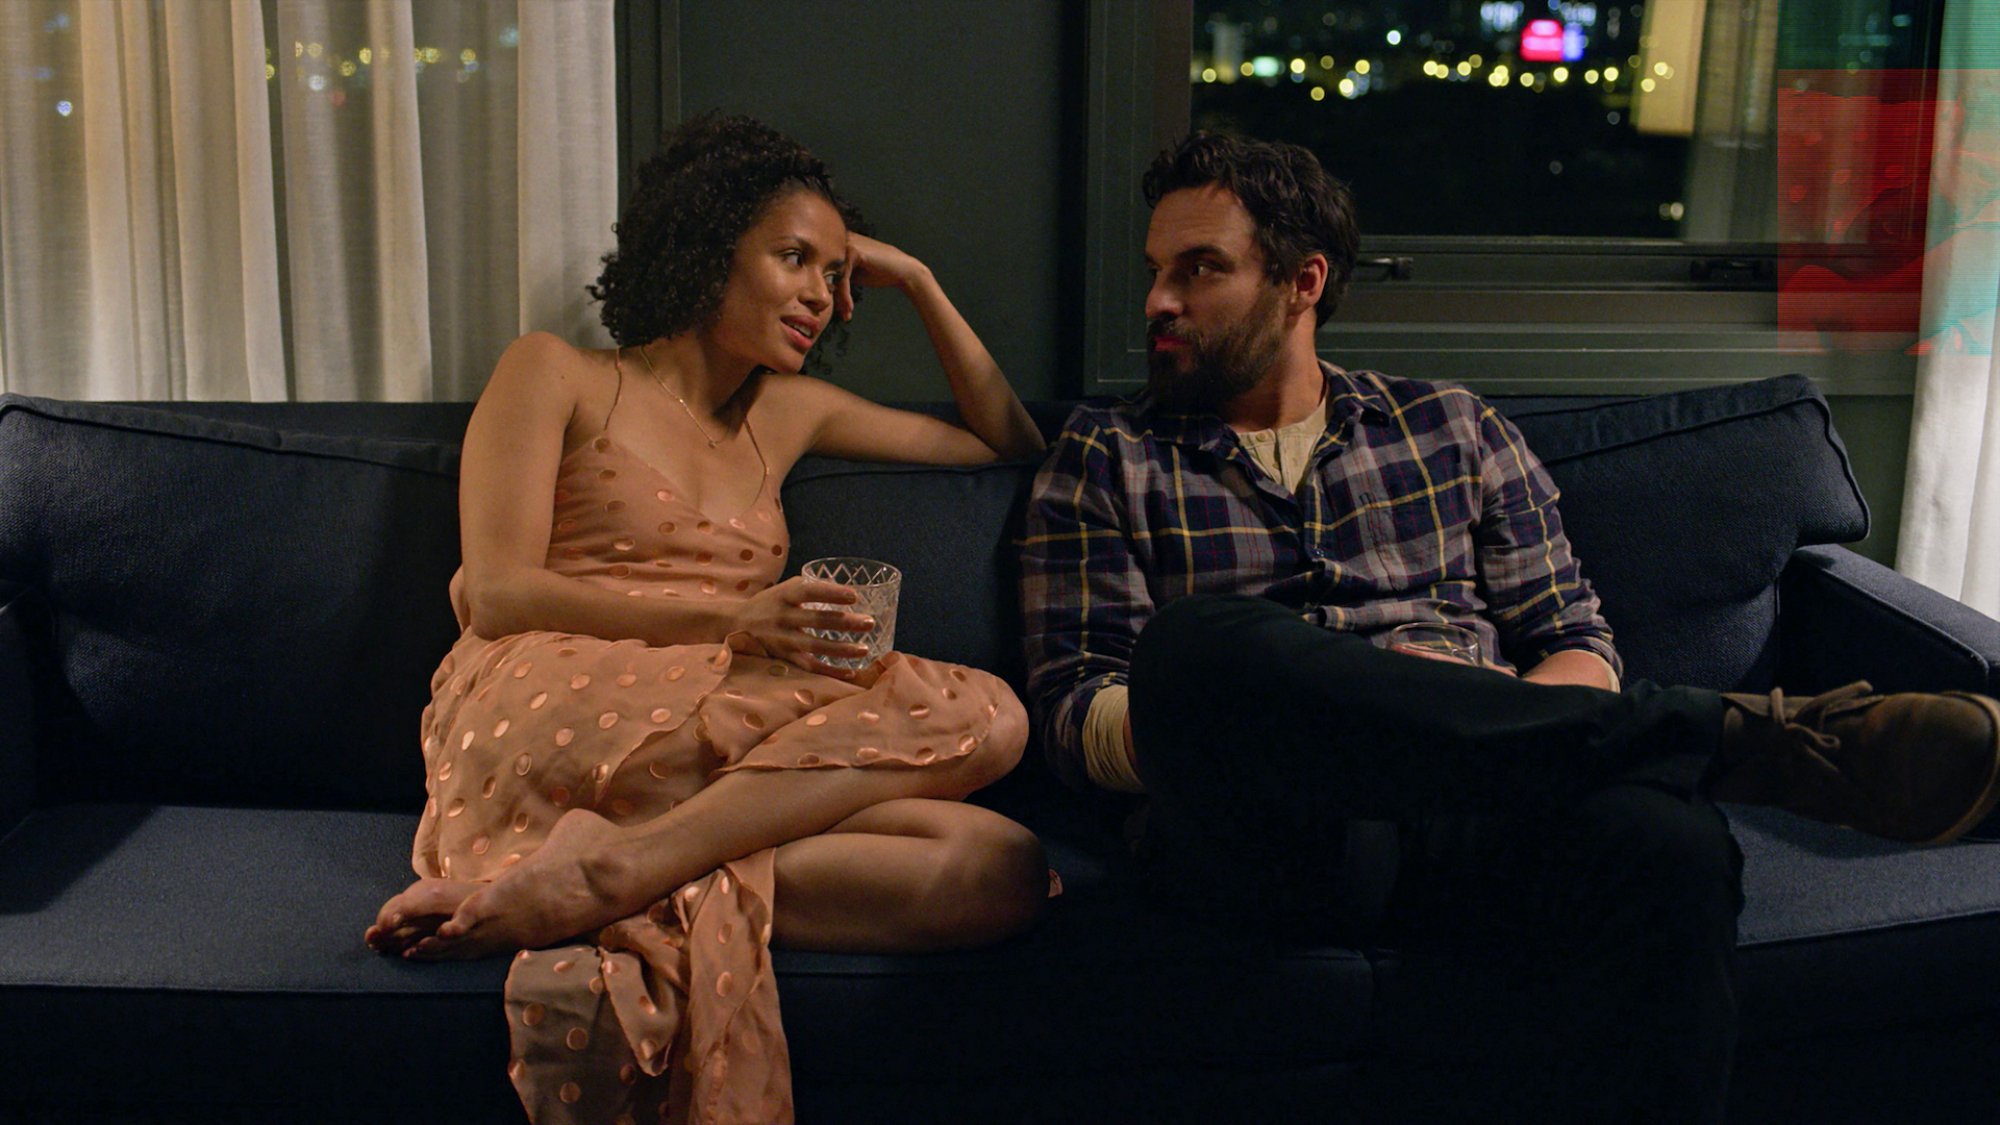 A scene from "Easy" Season 3: couple on a couch